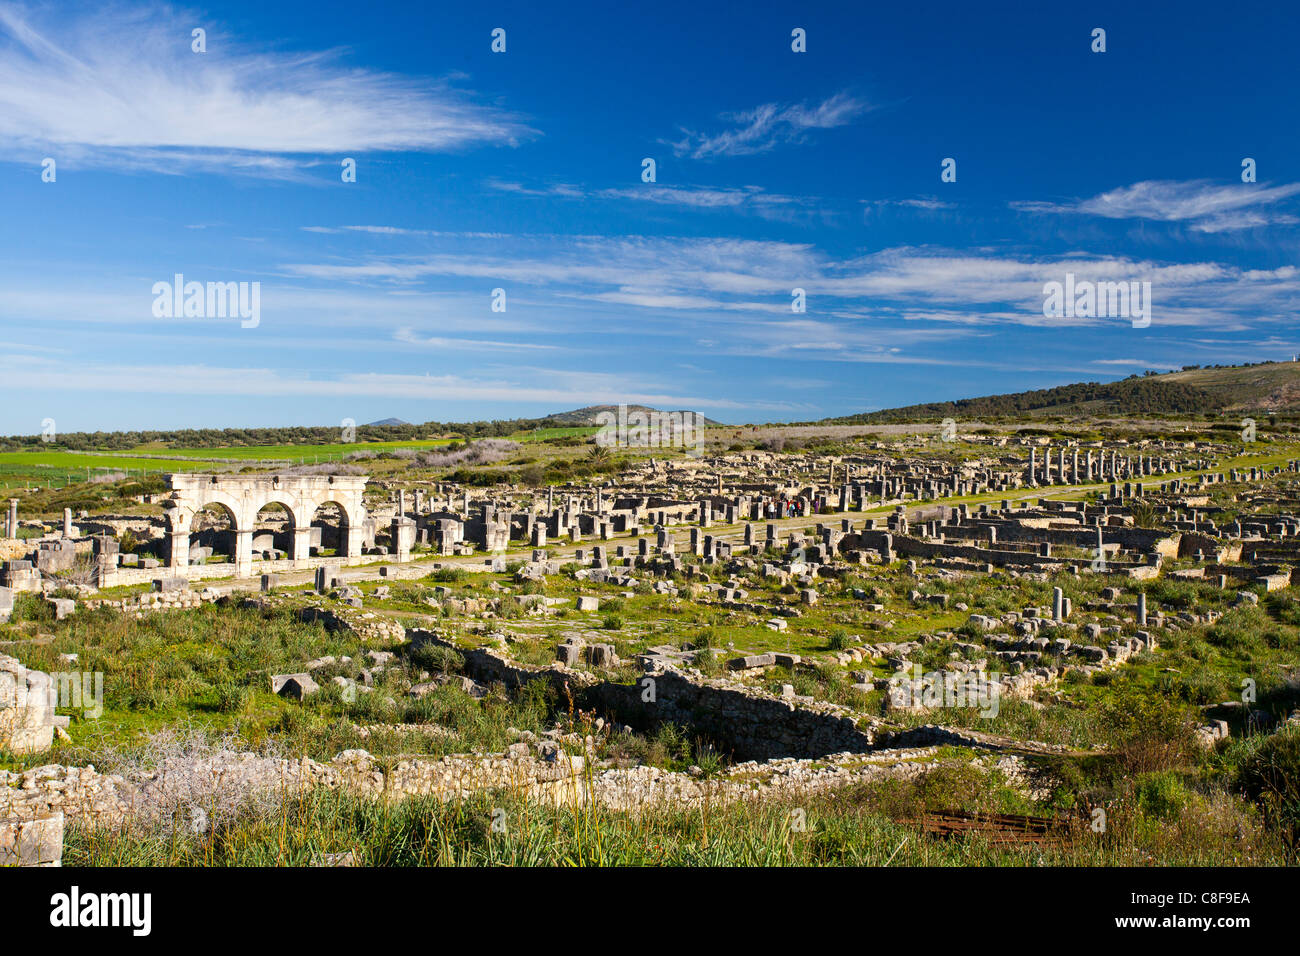 Morocco, North Africa, Africa, Roman, ruins, Voulibilis, antiquity, ancient world, Stock Photo